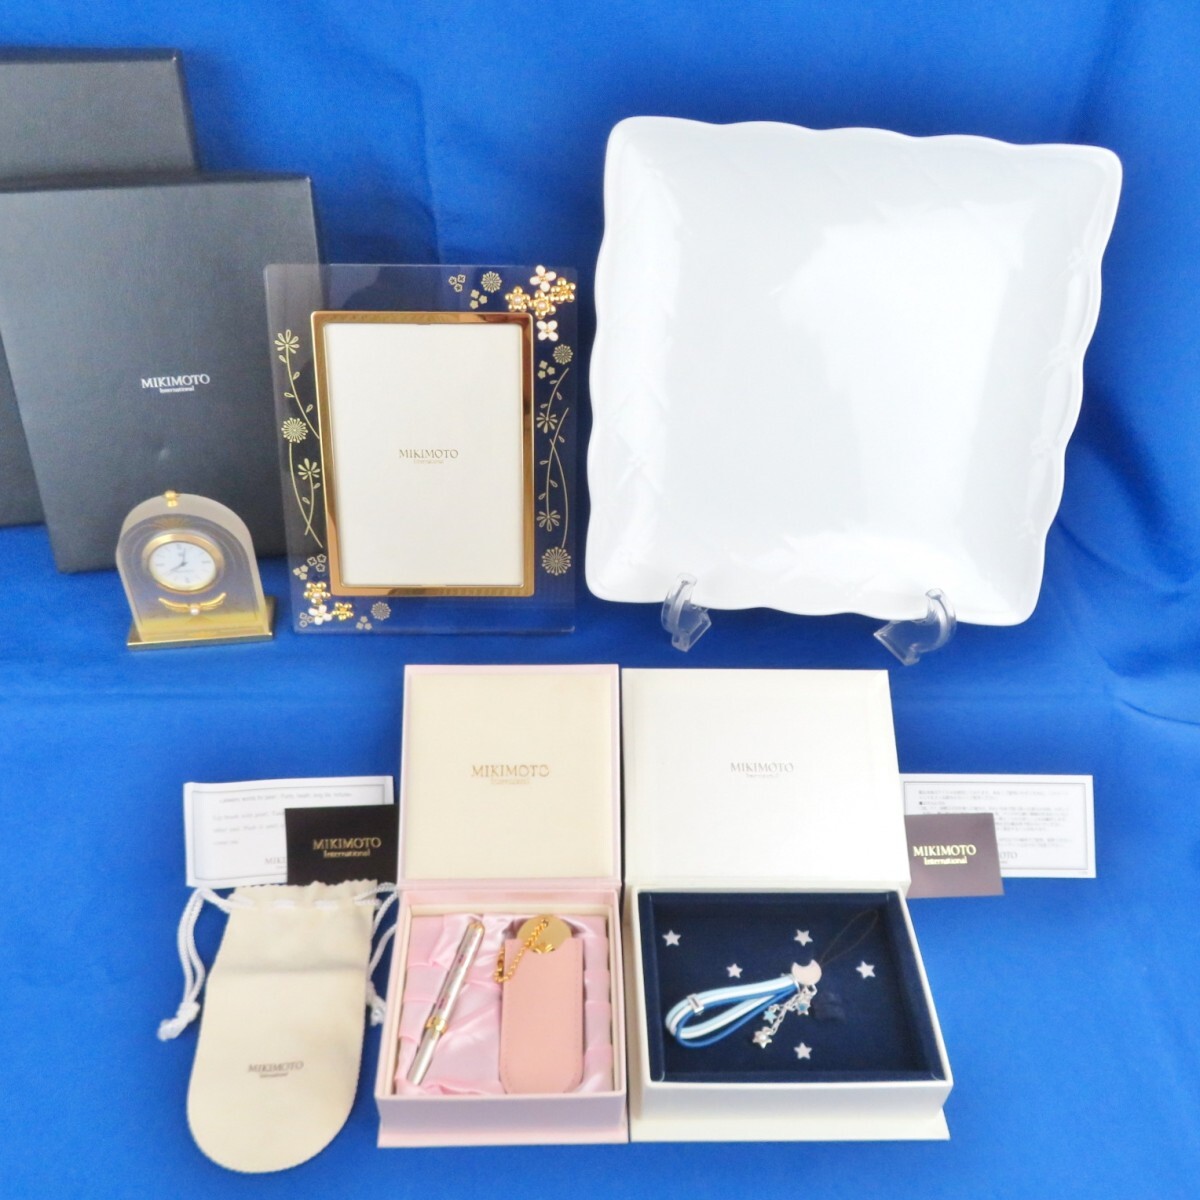  unused equipped summarize Mikimoto square plate 22cm photo frame put clock strap lip brush & mirror out box attaching equipped 0505-069